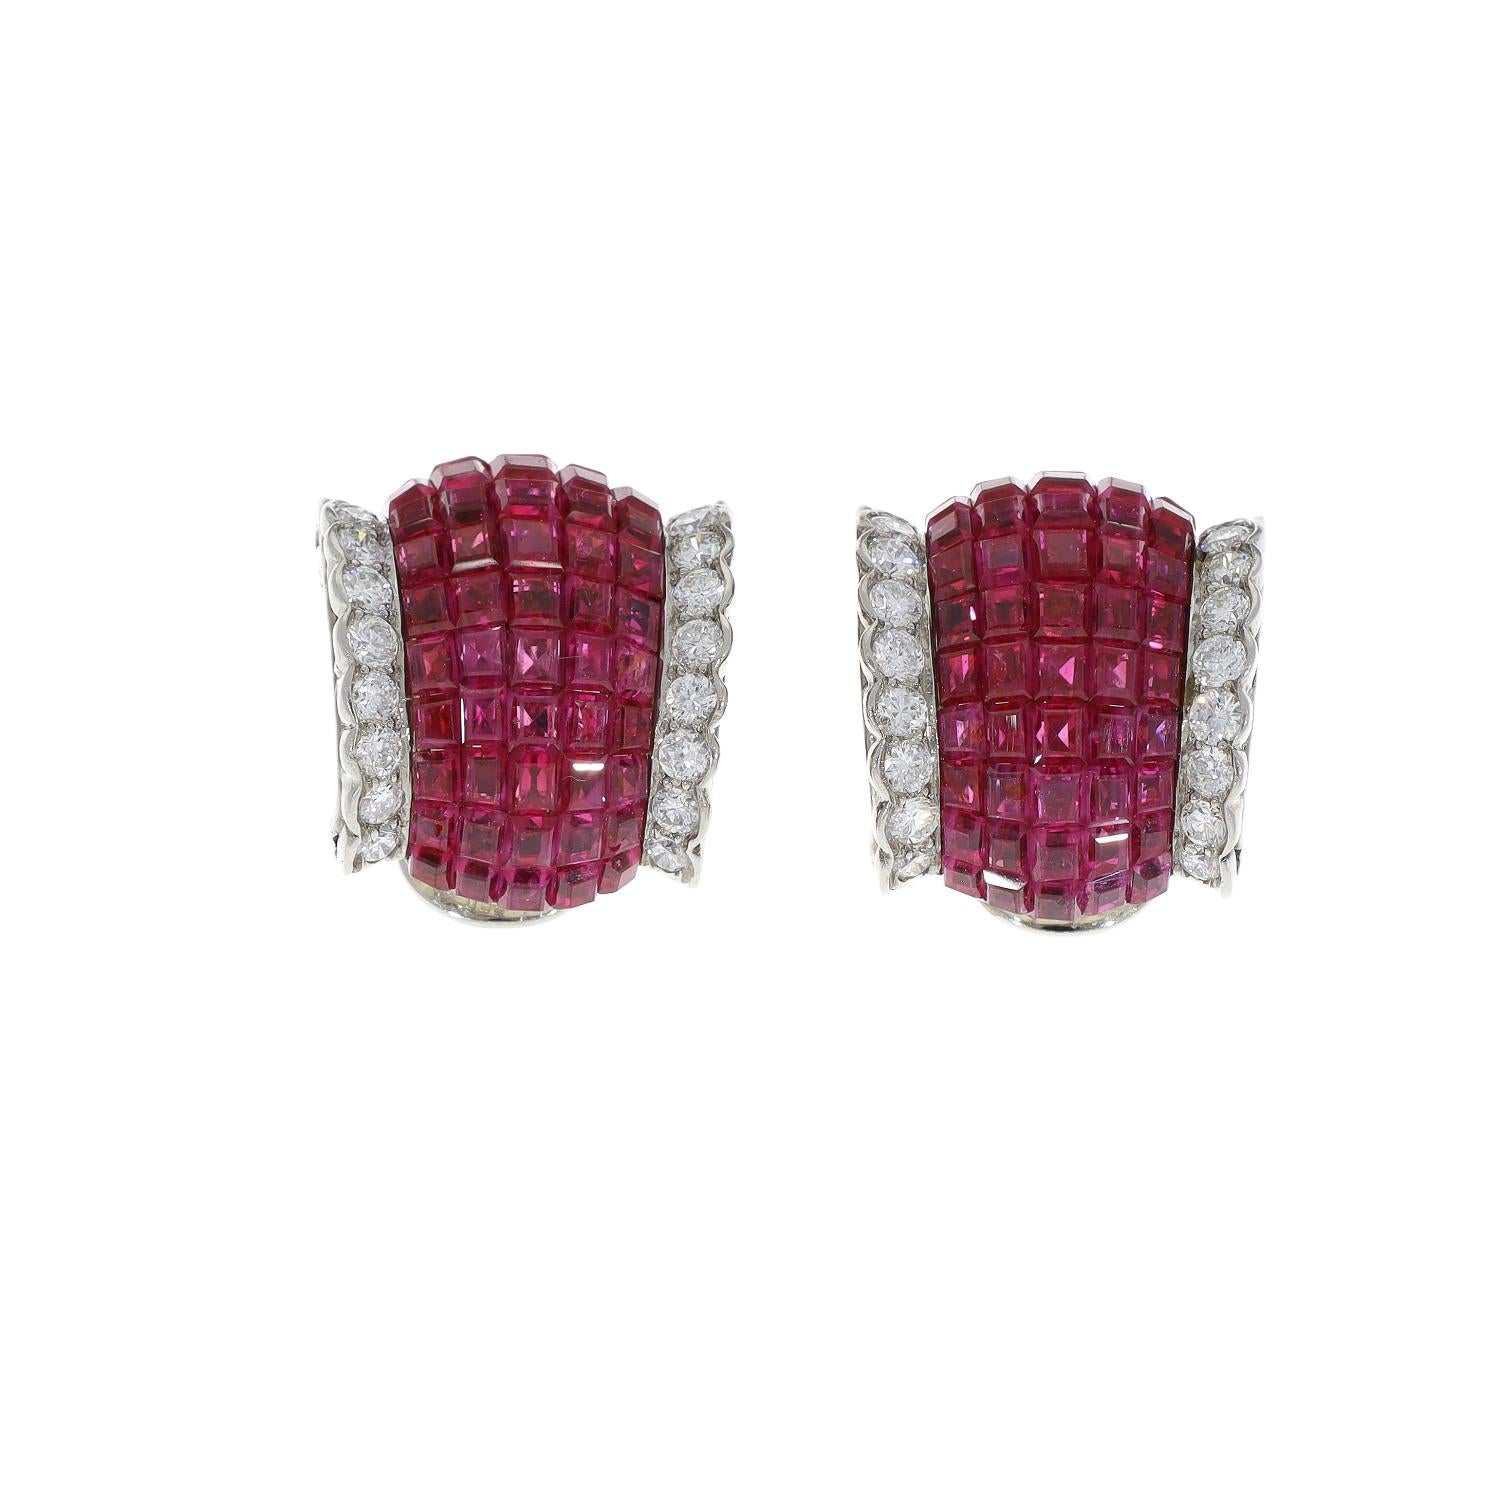 Excellent and rare Van Cleef & Arpels invisibly set vivid ruby diamond 'Boule' ear clips. From Our Signed Jewels Vintage Collection.
The bombe ruby curve edged with diamonds earclips is regarded as one of Van Cleef & Arpels most elegant designs